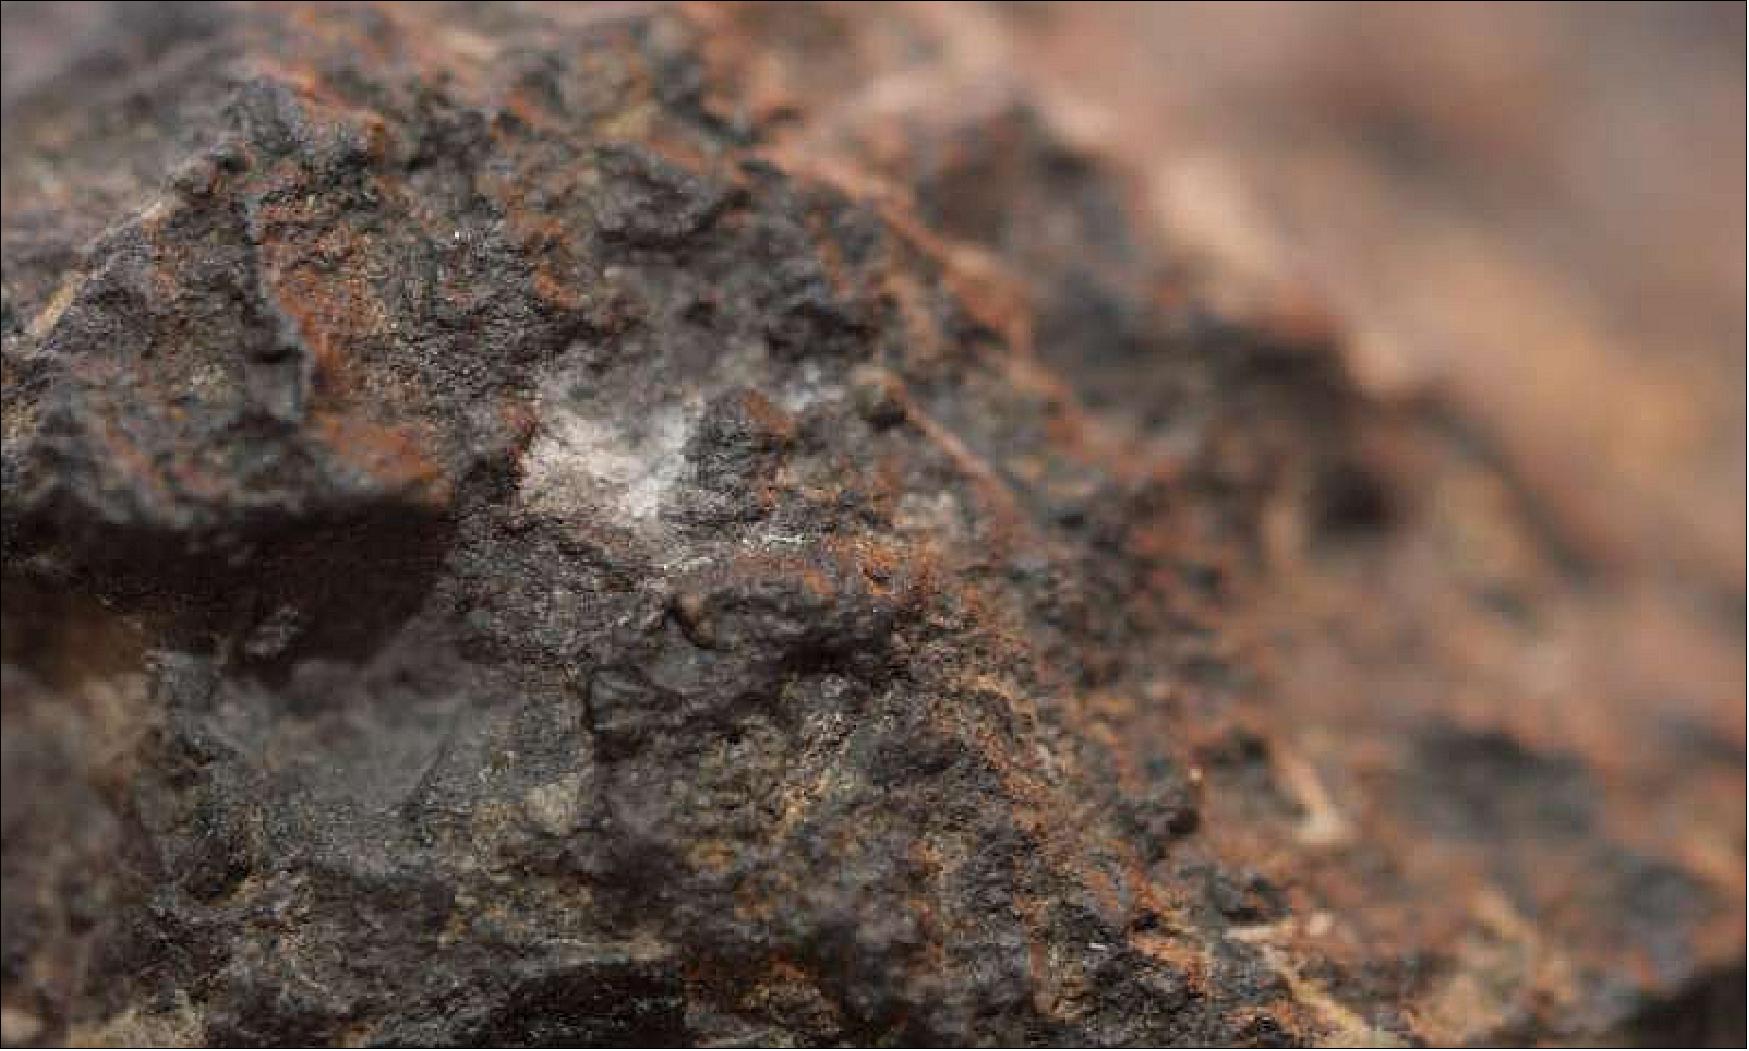 Figure 92: The white inclusions called CAIs are among the oldest solid matter in the solar system (image credit: Rohan Mehra, Division for Strategic Public Relations)